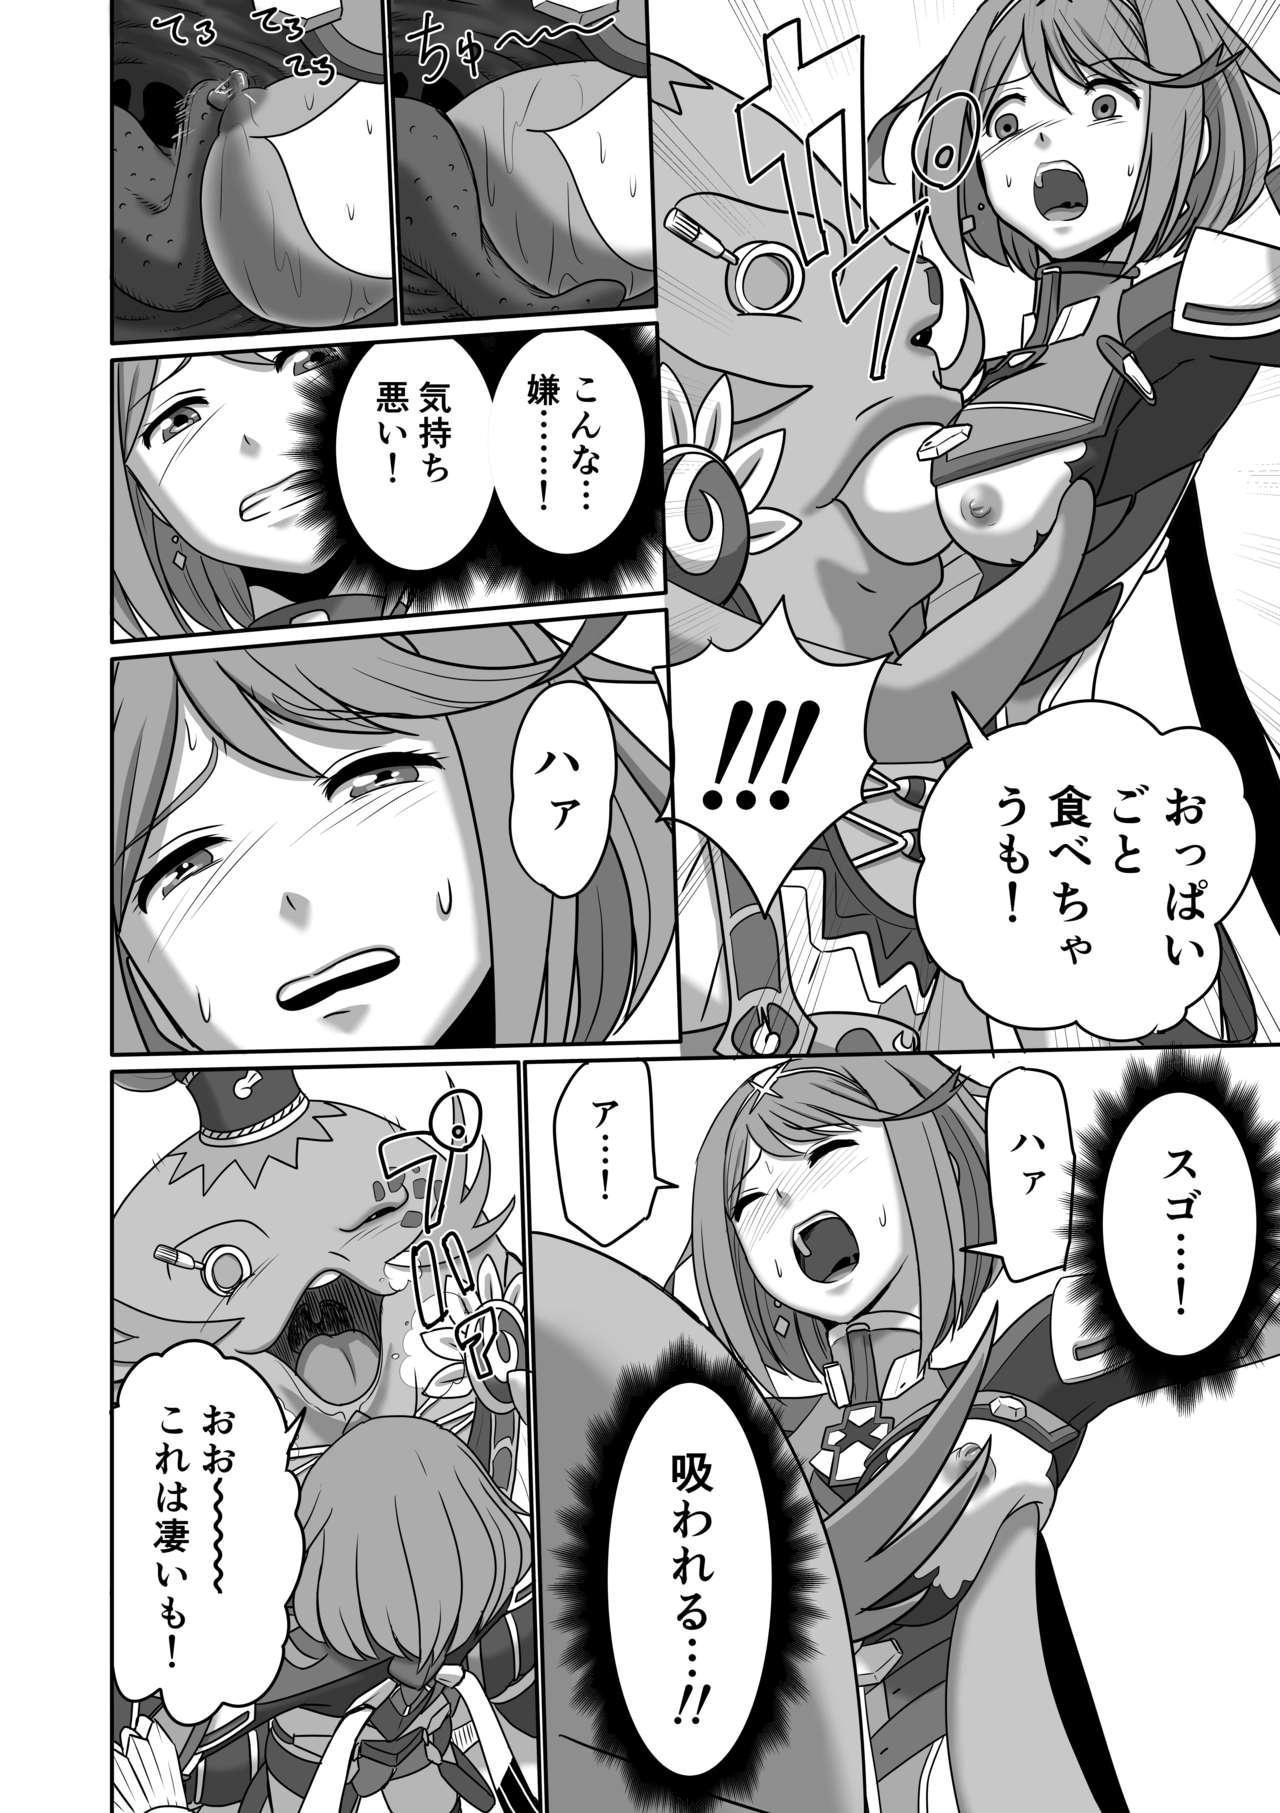 Mulher BLADE SET DX - Xenoblade chronicles 2 Masterbate - Page 10